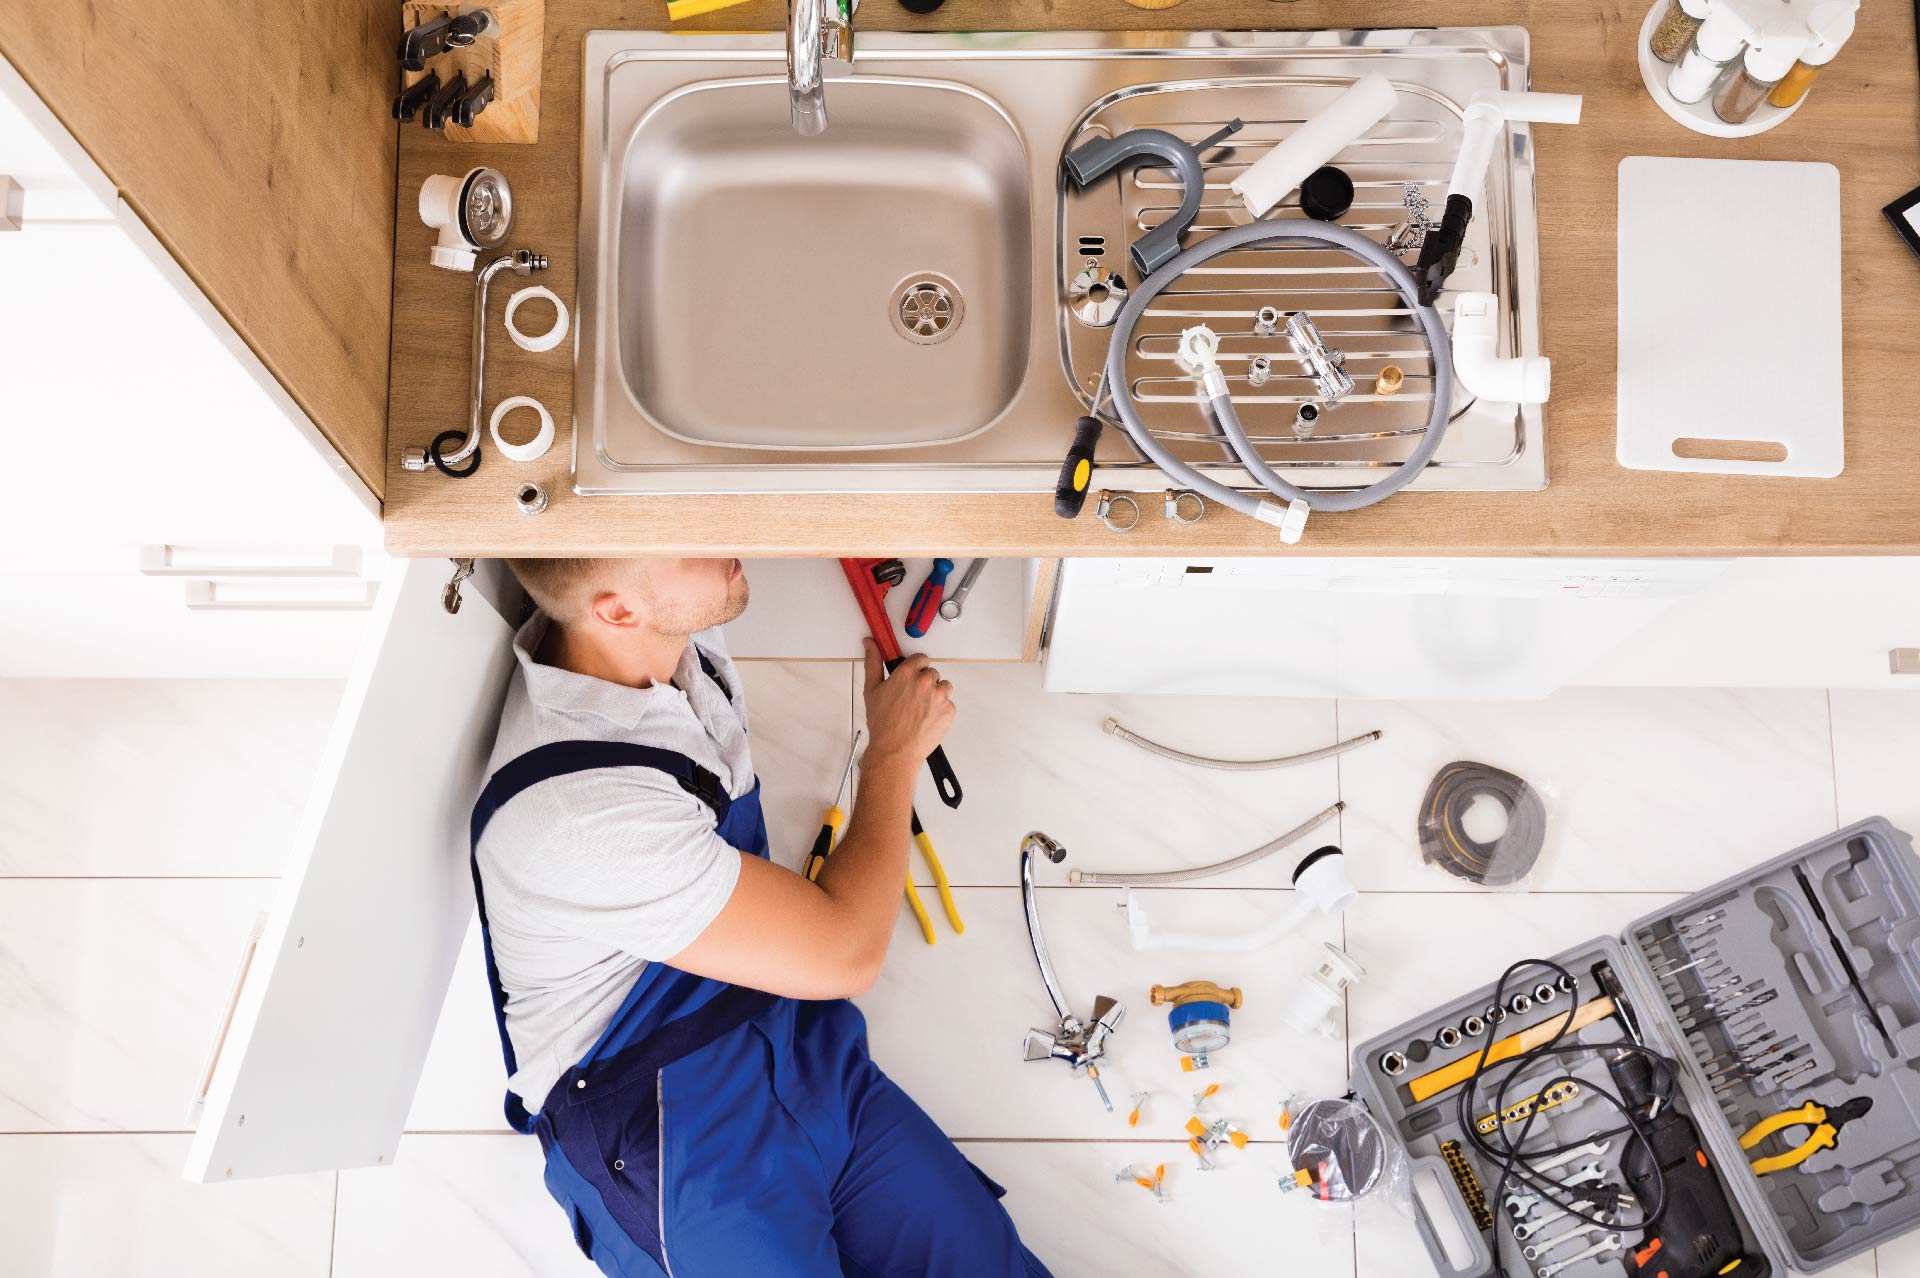 6 Facts About Plumbing - It's More Interesting Than You May Think!